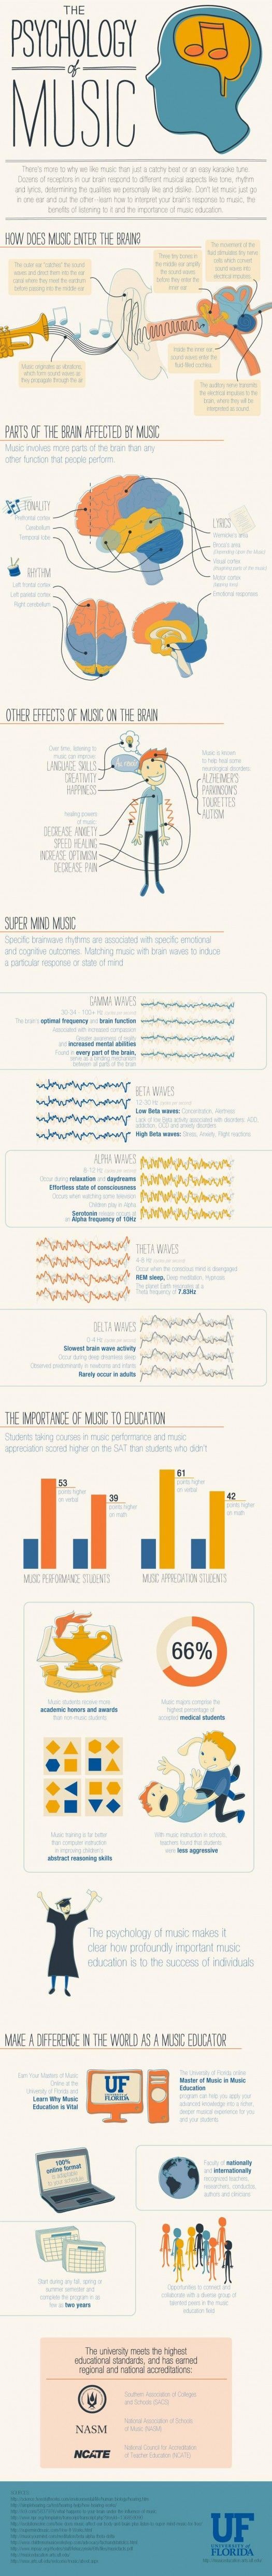 The Psychology of Music. Ignore the second half. Sorry, but music isnt a miracle worker. Listening to it wont instantly raise your